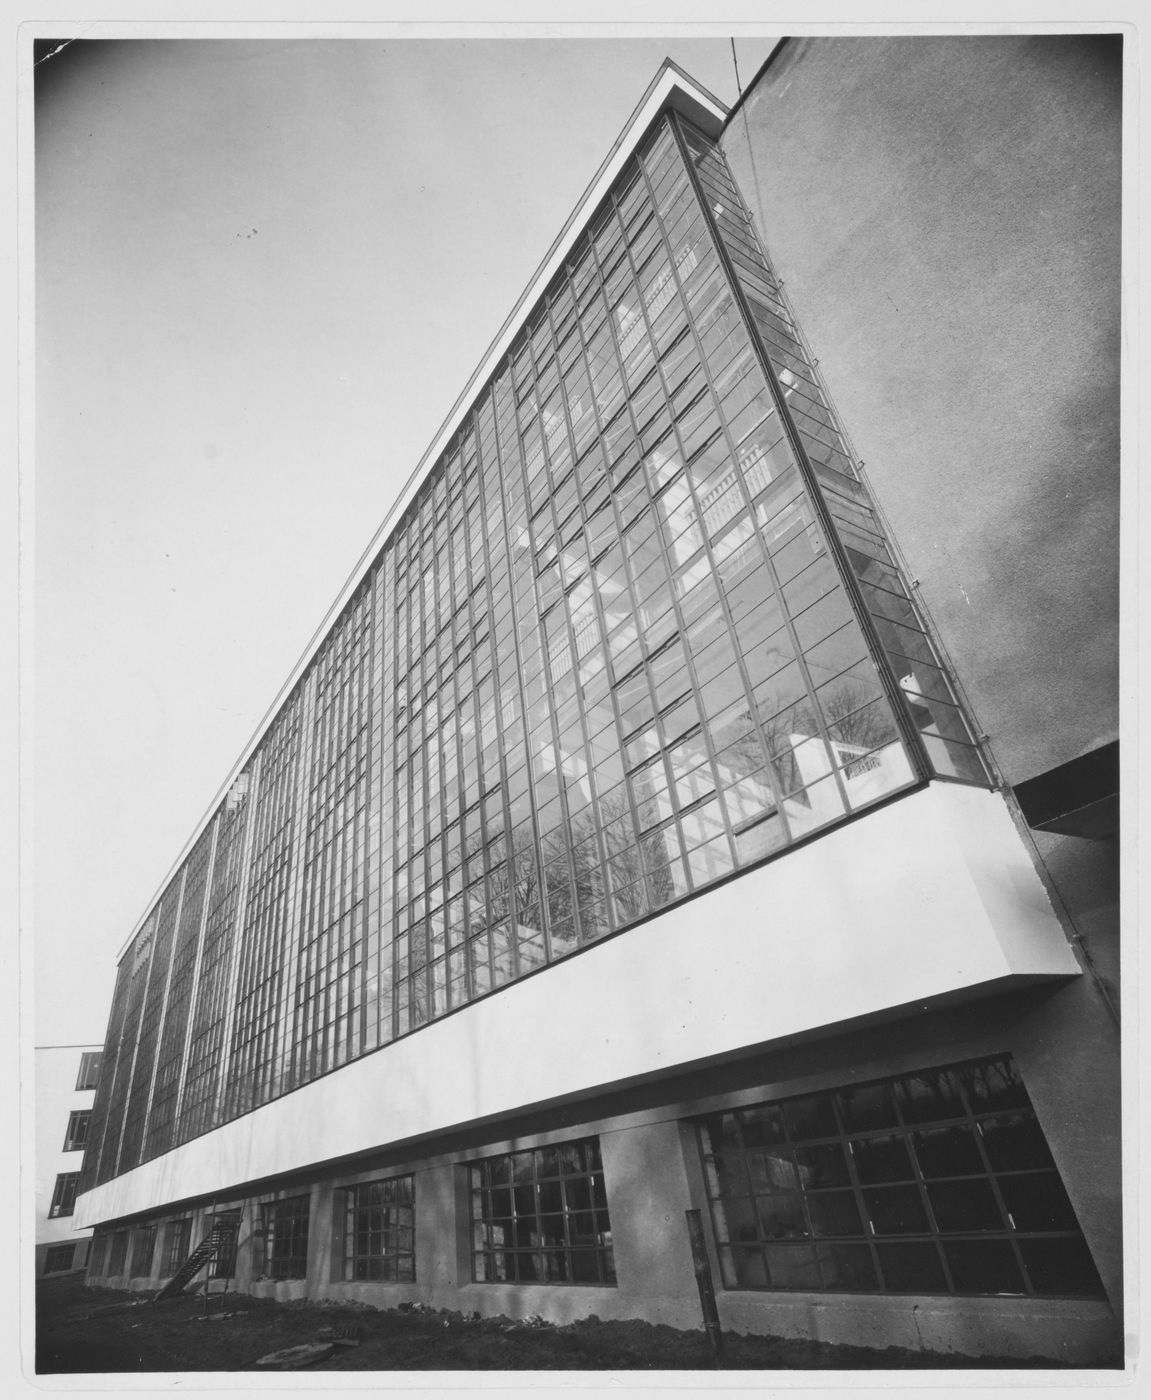 Lucia-Moholy-Exterior-view-of-the-workshop-wing-of-the-Bauhaus-building-showing-a-glass-curtain-wall-Dessau-Germany_sw